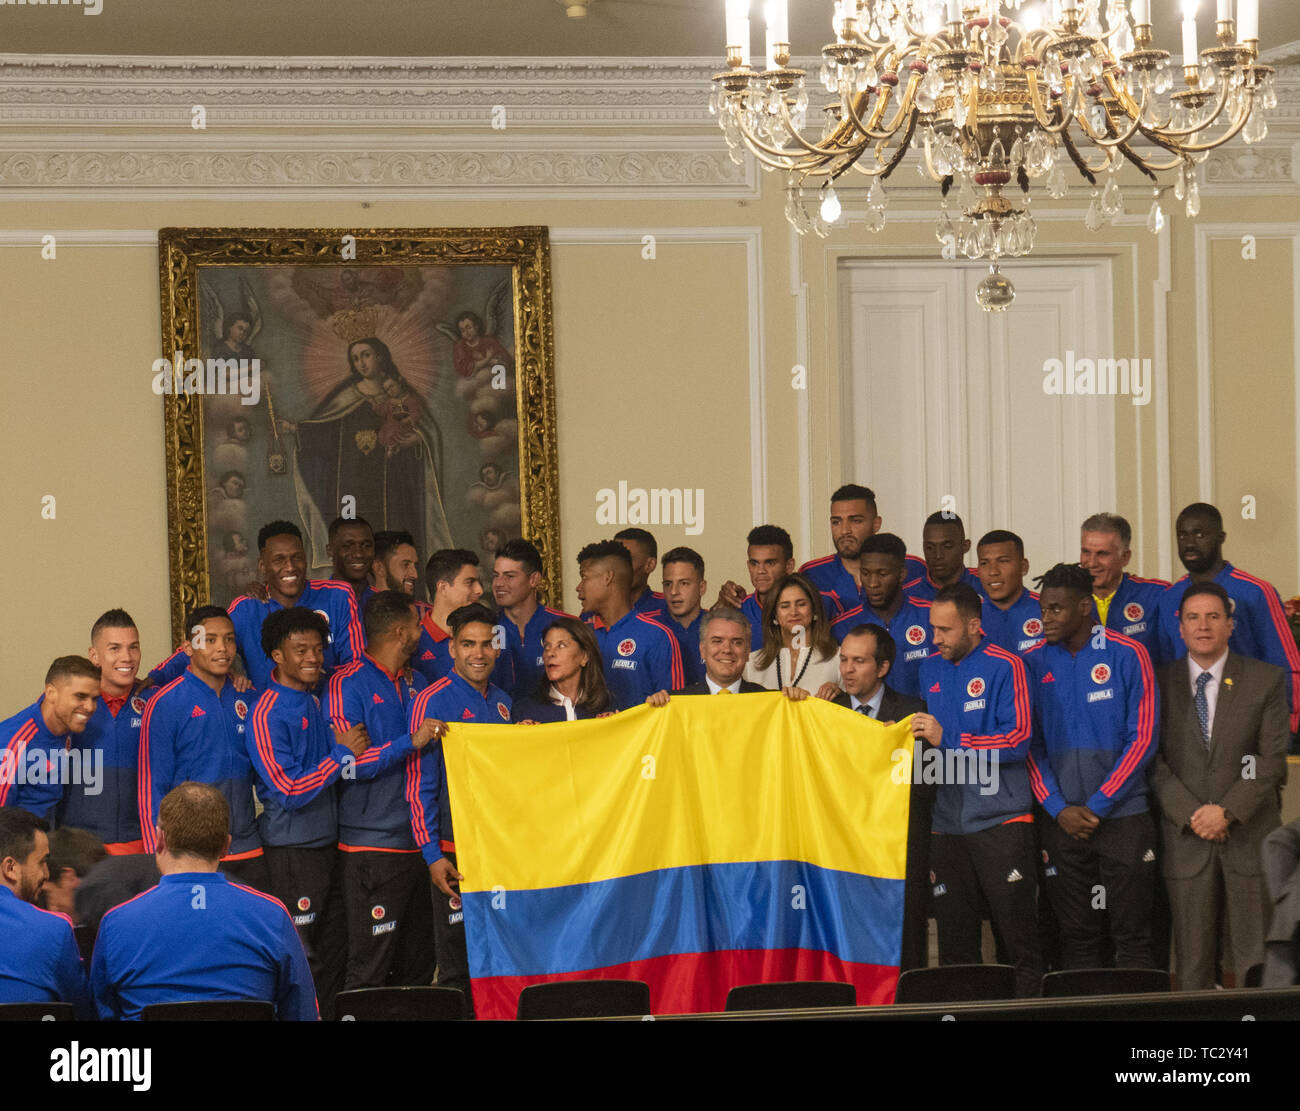 June 4, 2019 - The Colombian National Team received the National Pavilion from the hands of President IvÃ¡n Duque. Credit: Daniel Garzon Herazo/ZUMA Wire/Alamy Live News Stock Photo